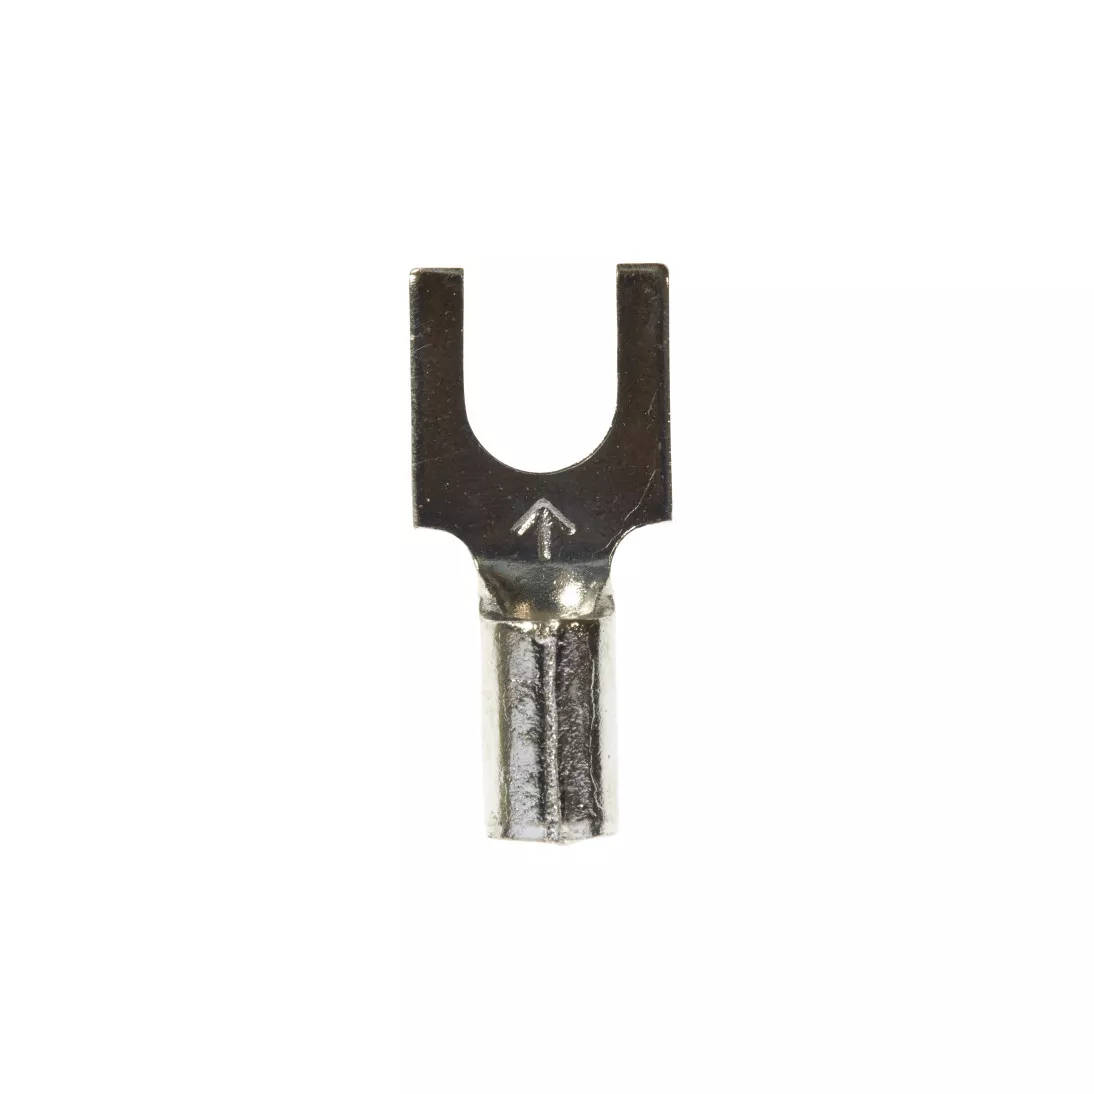 3M™ Scotchlok™ Block Fork, Non-Insulated Brazed Seam M14-8FBK, Stud Size
8, suitable for use in a terminal block, 1000/Case